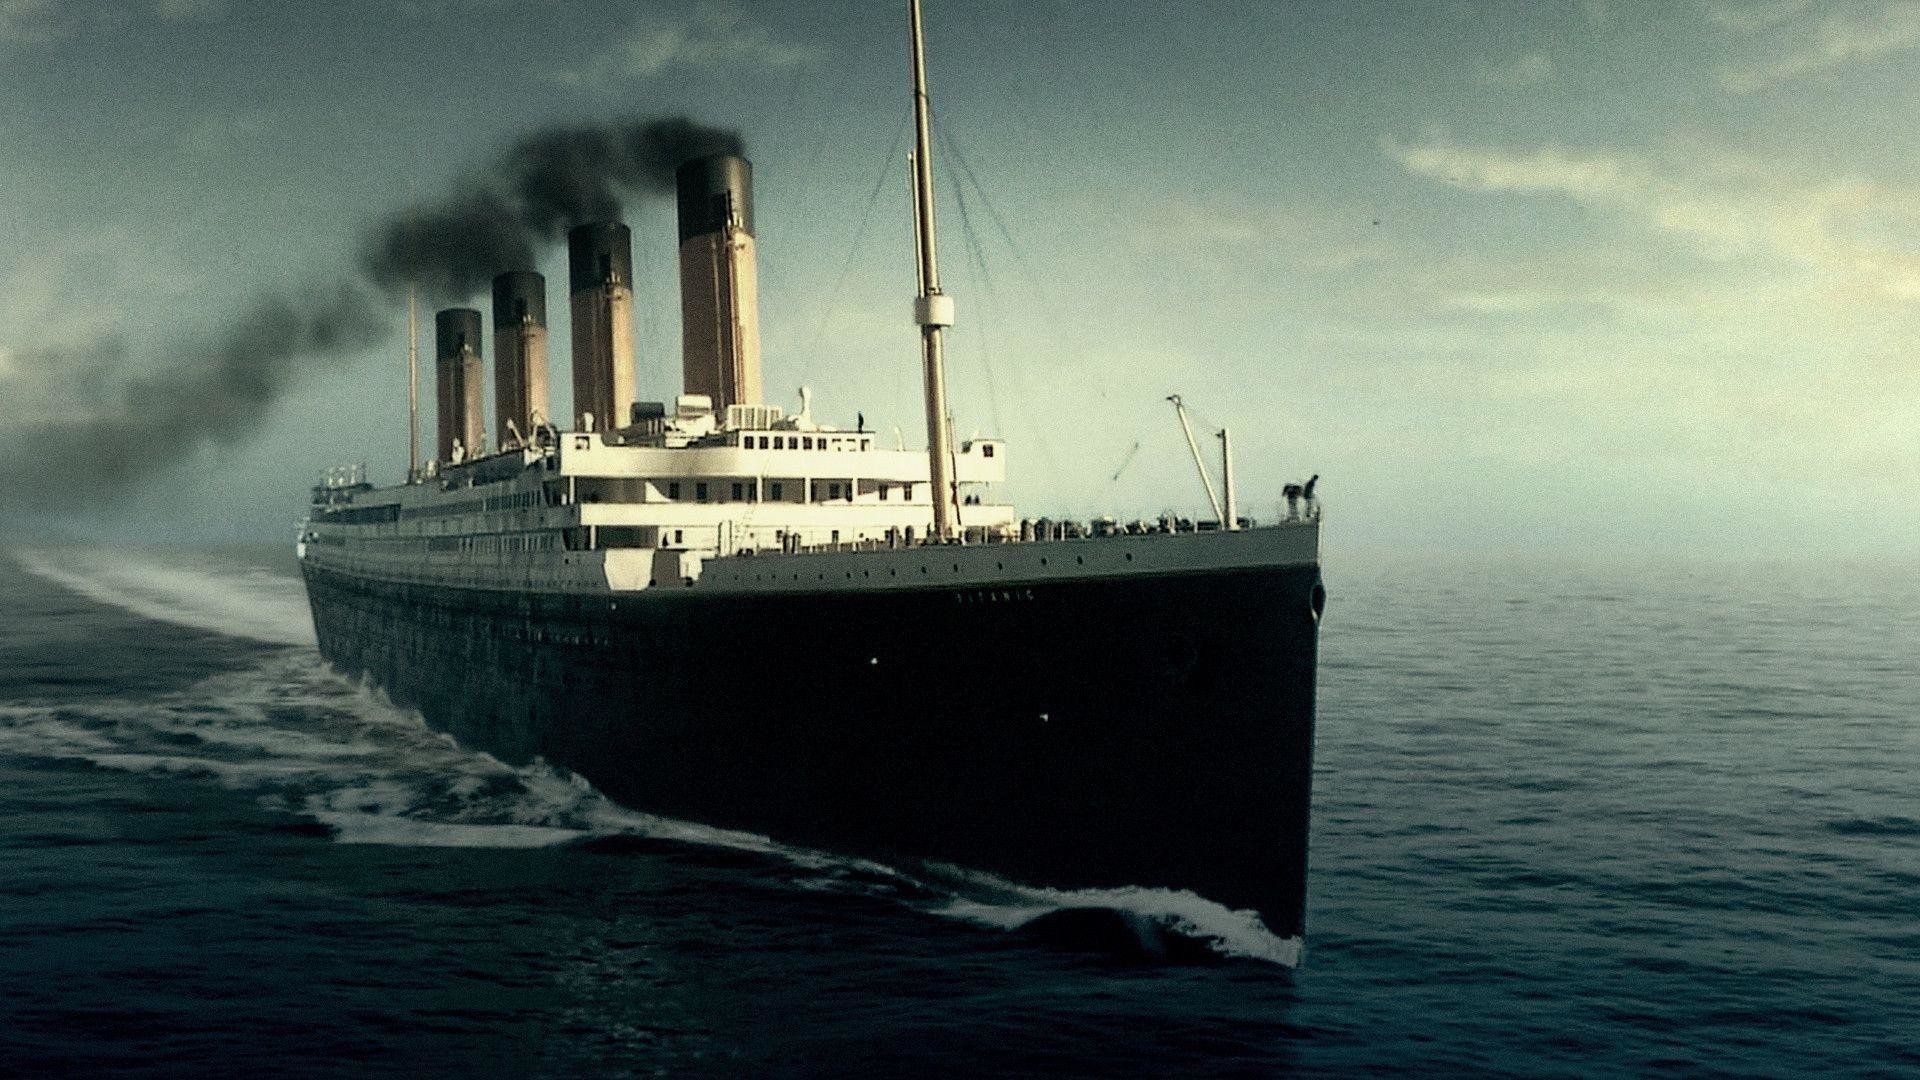 Rms Titanic Wallpaper Background Pictures